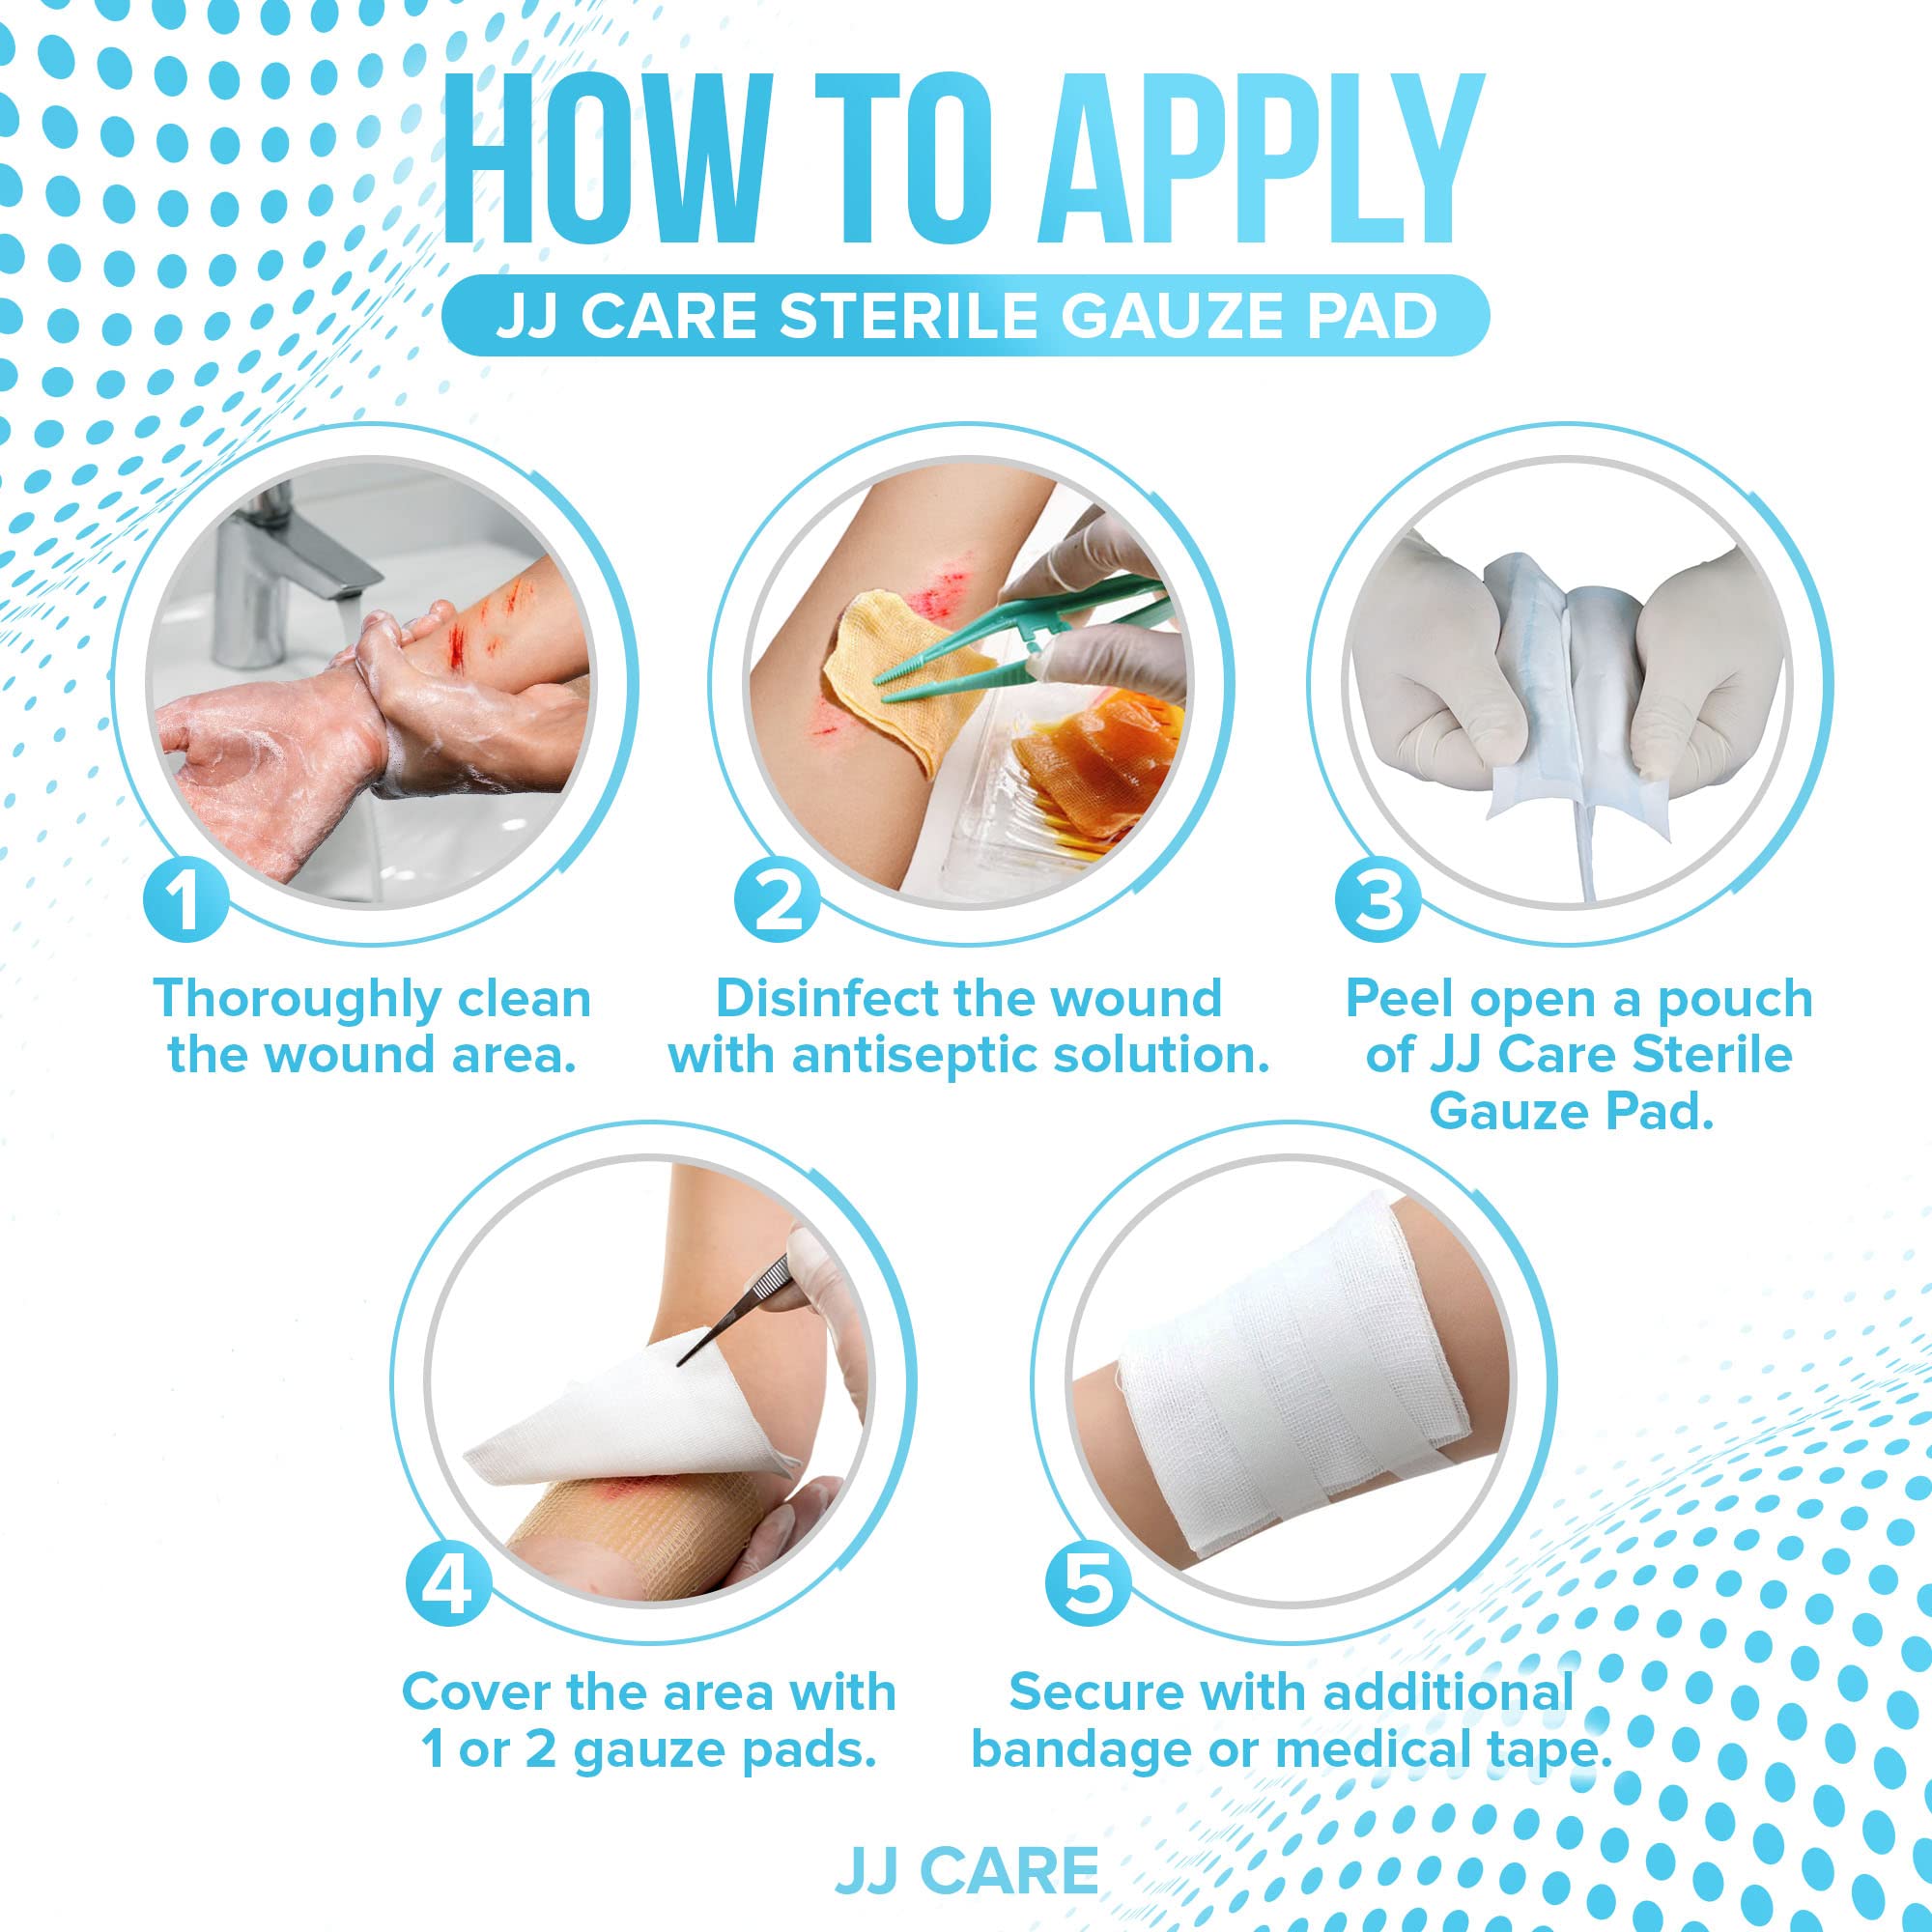 JJ CARE Sterile Gauze Pads 4" x 4" (Pack of 100), 12-Ply Cotton Gauze Pads, Individually-Wrapped Sterile Gauze Sponges, 100% Woven, Non-Stick Medical Gauze Pads for First Aid Kit & Wound Care